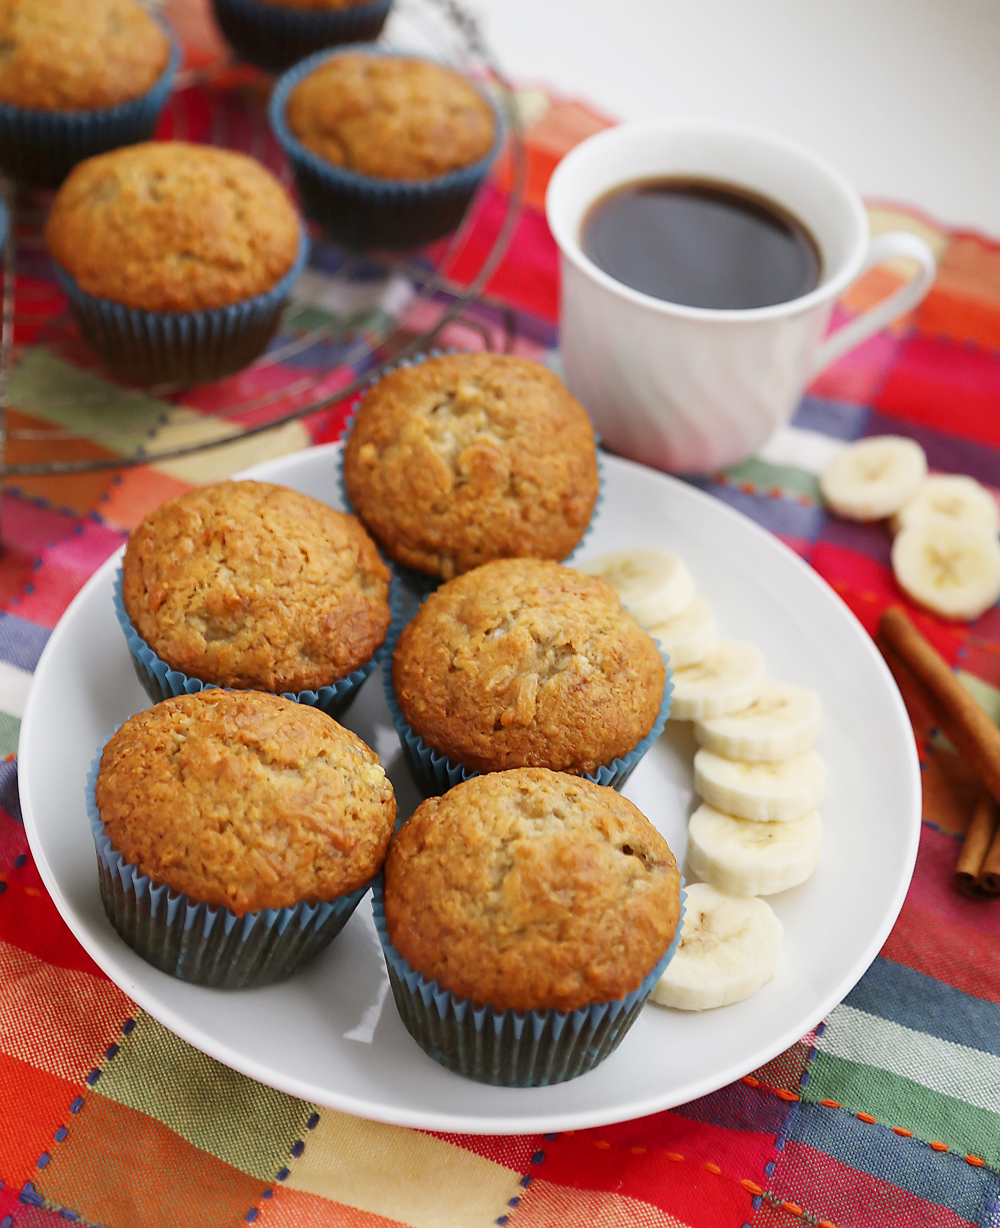 Toasted Coconut Banana Muffins - Super moist, fluffy banana muffins. These make a mouthwatering treat that pairs perfectly with your morning coffee! Thecomfortofcooking.com